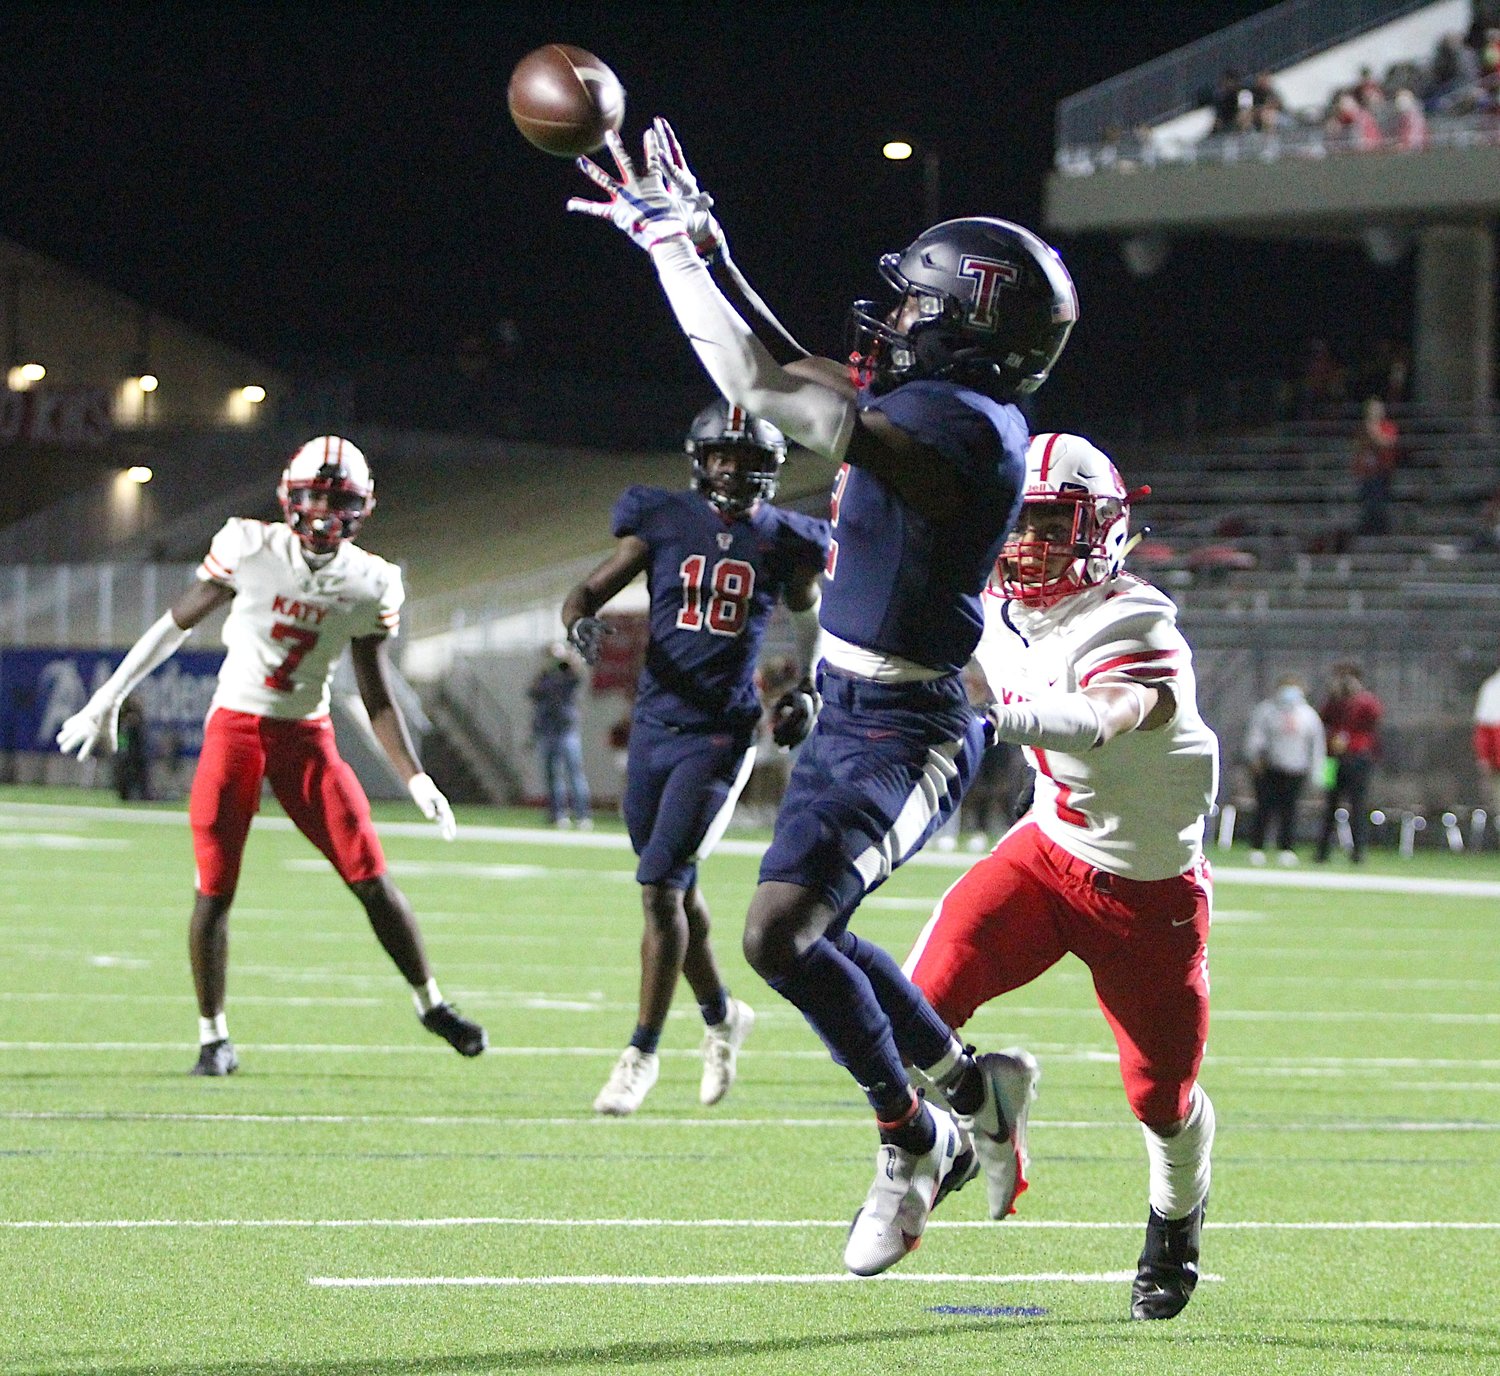 Tompkins junior receiver Joshua McMillan II leaps to haul in his first touchdown of the game during the Falcons' 24-19 win over Katy on Thursday evening at Legacy Stadium.